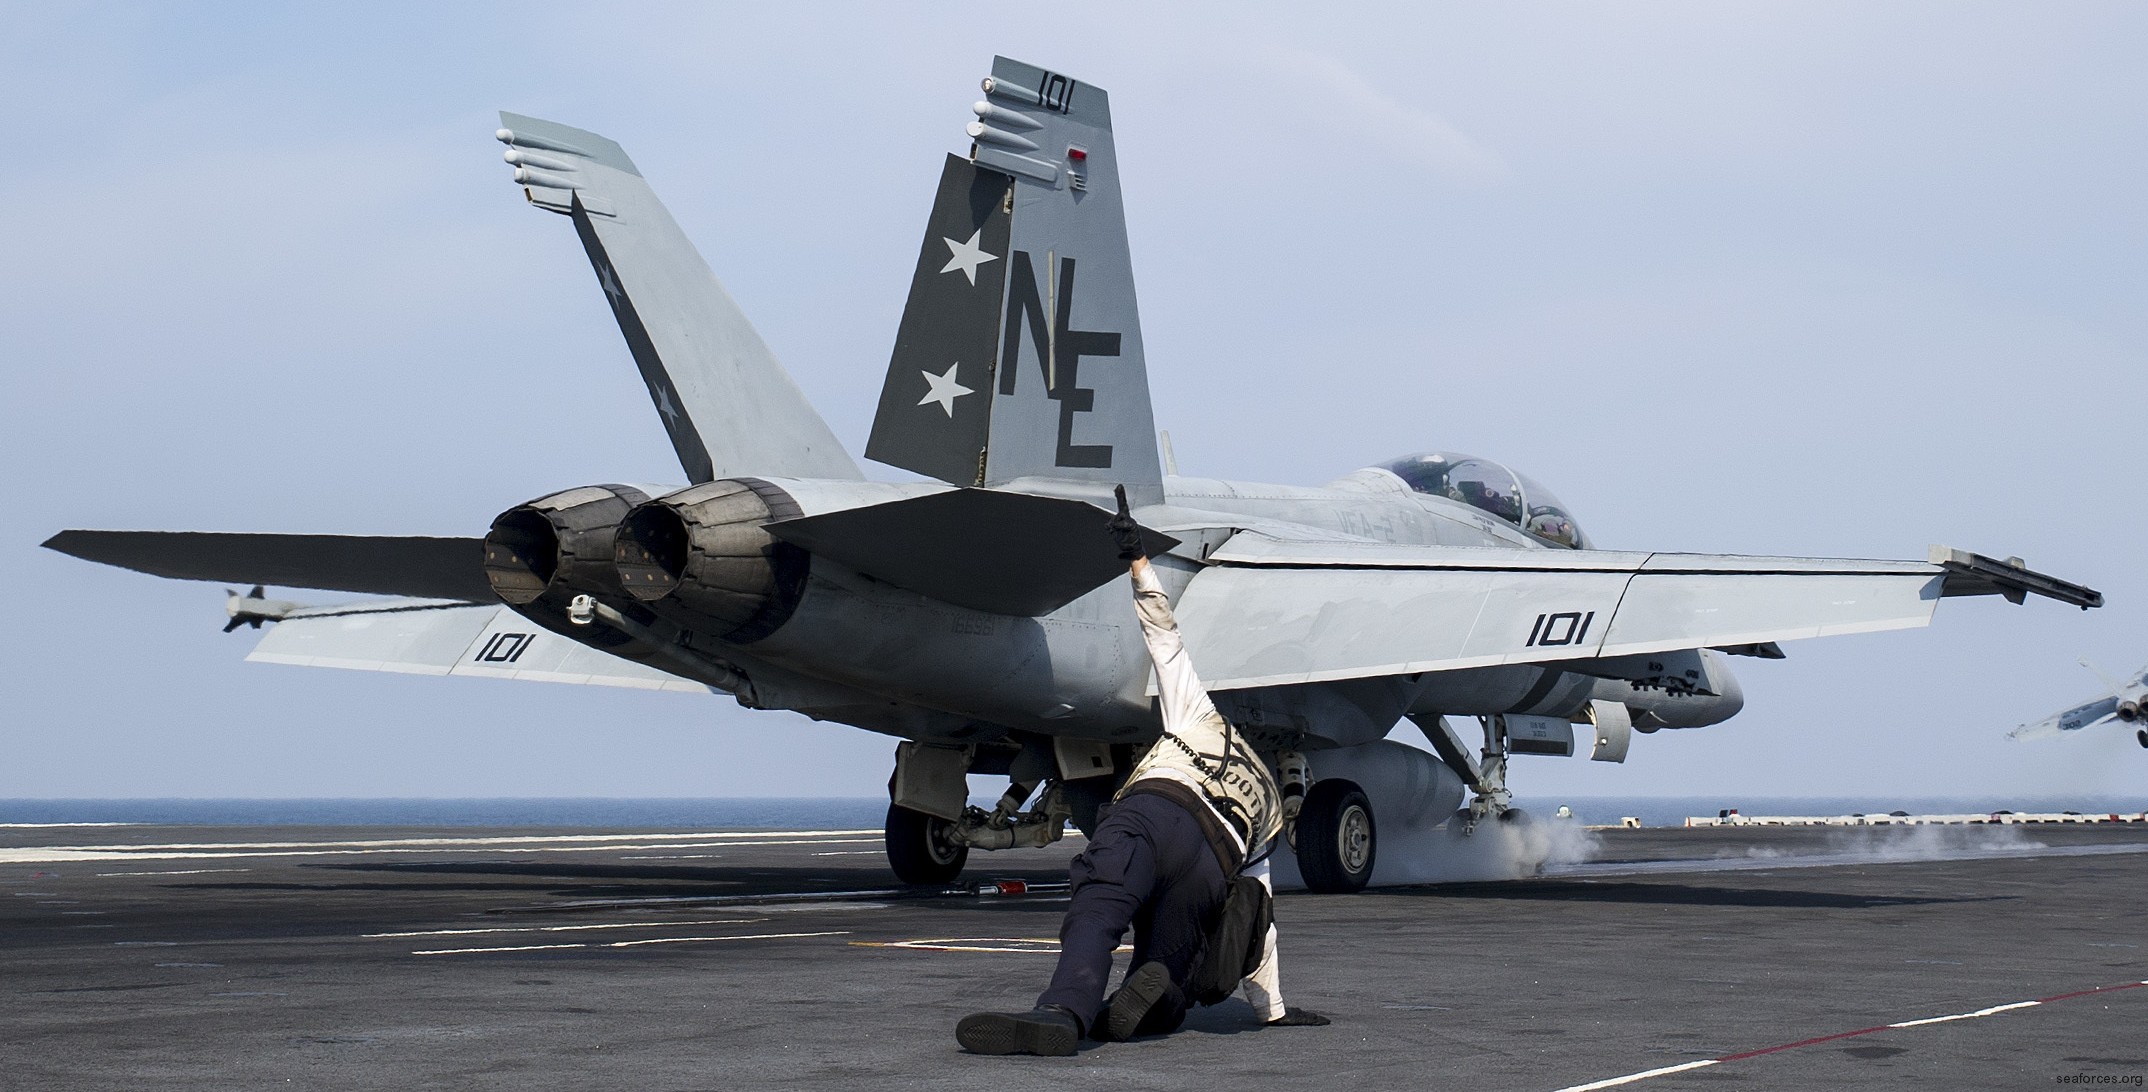 vfa-2 bounty hunters strike fighter squadron us navy f/a-18f super hornet carrier air wing cvw-2 uss george washington cvn-73 27